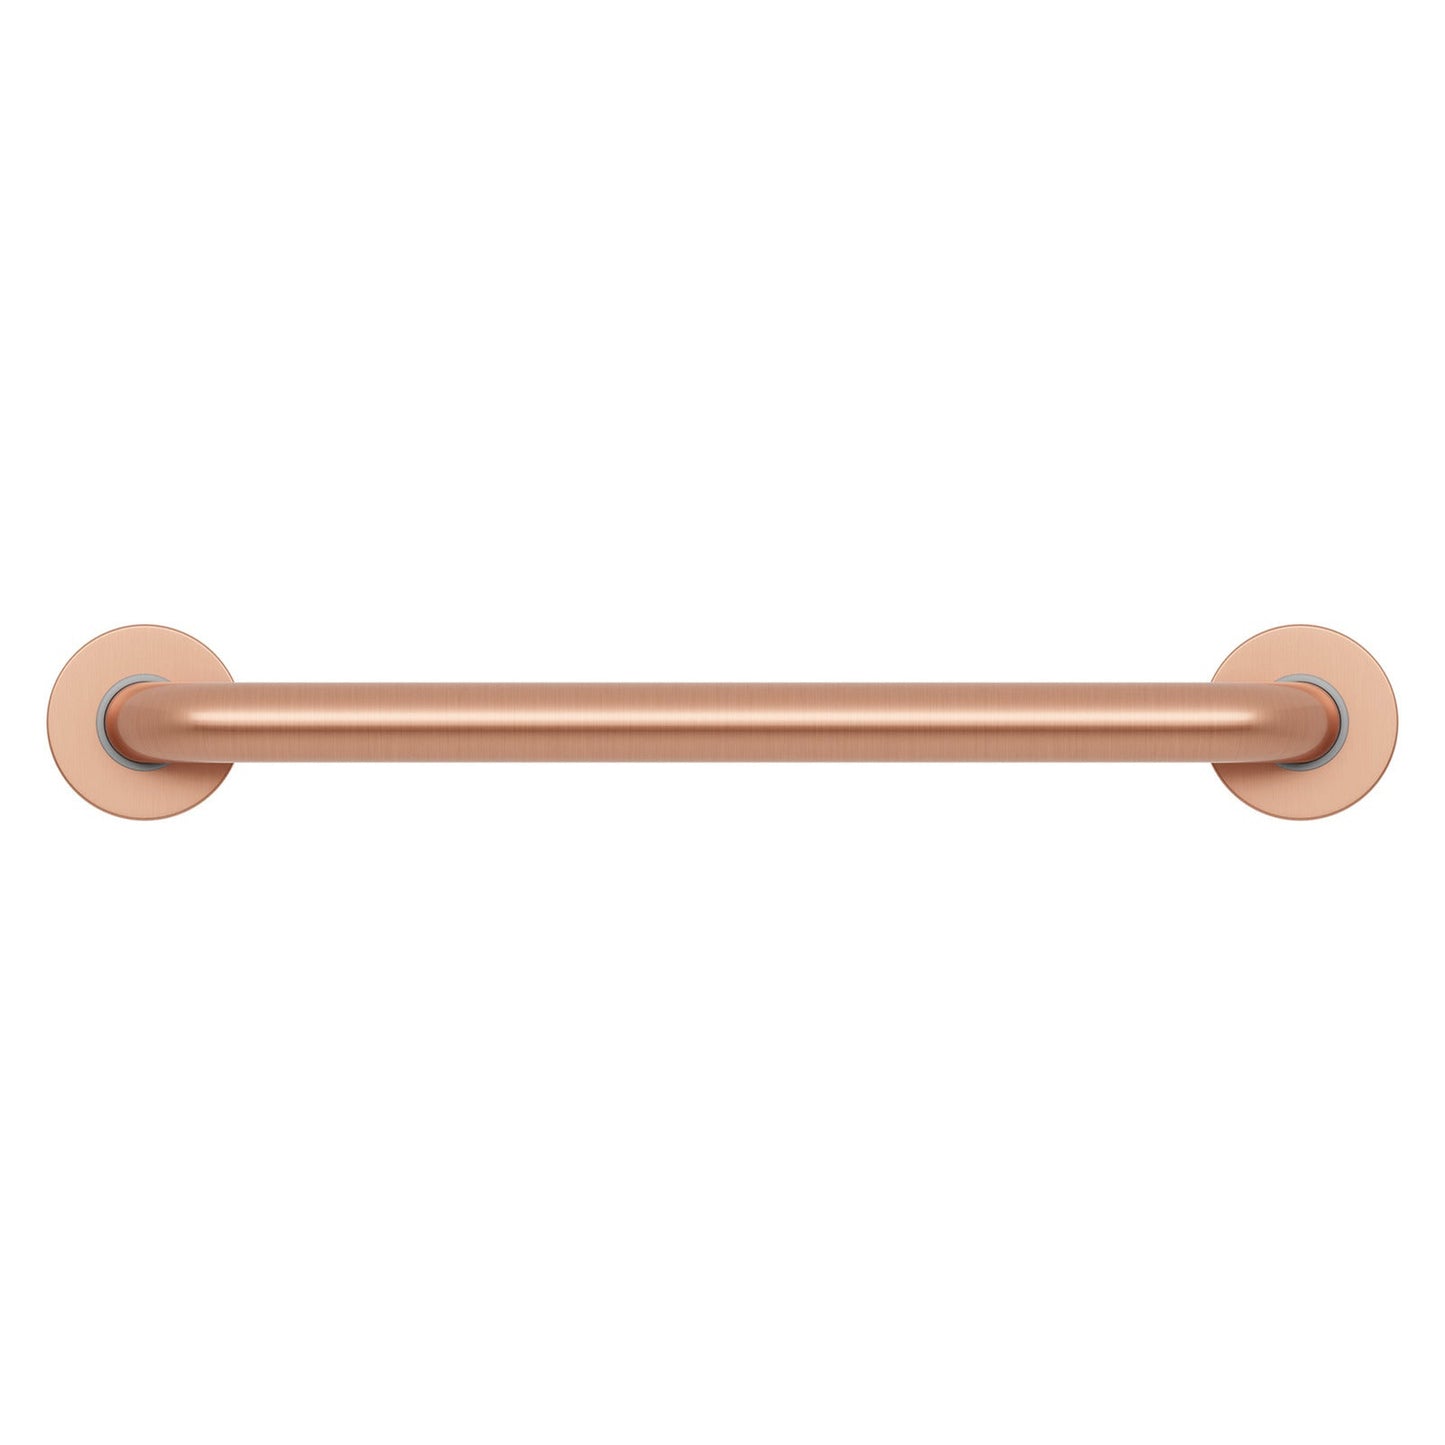 Evekare 18" x 1.25" Stainless Steel Concealed Mount Grab Bar in Brushed Rose Gold